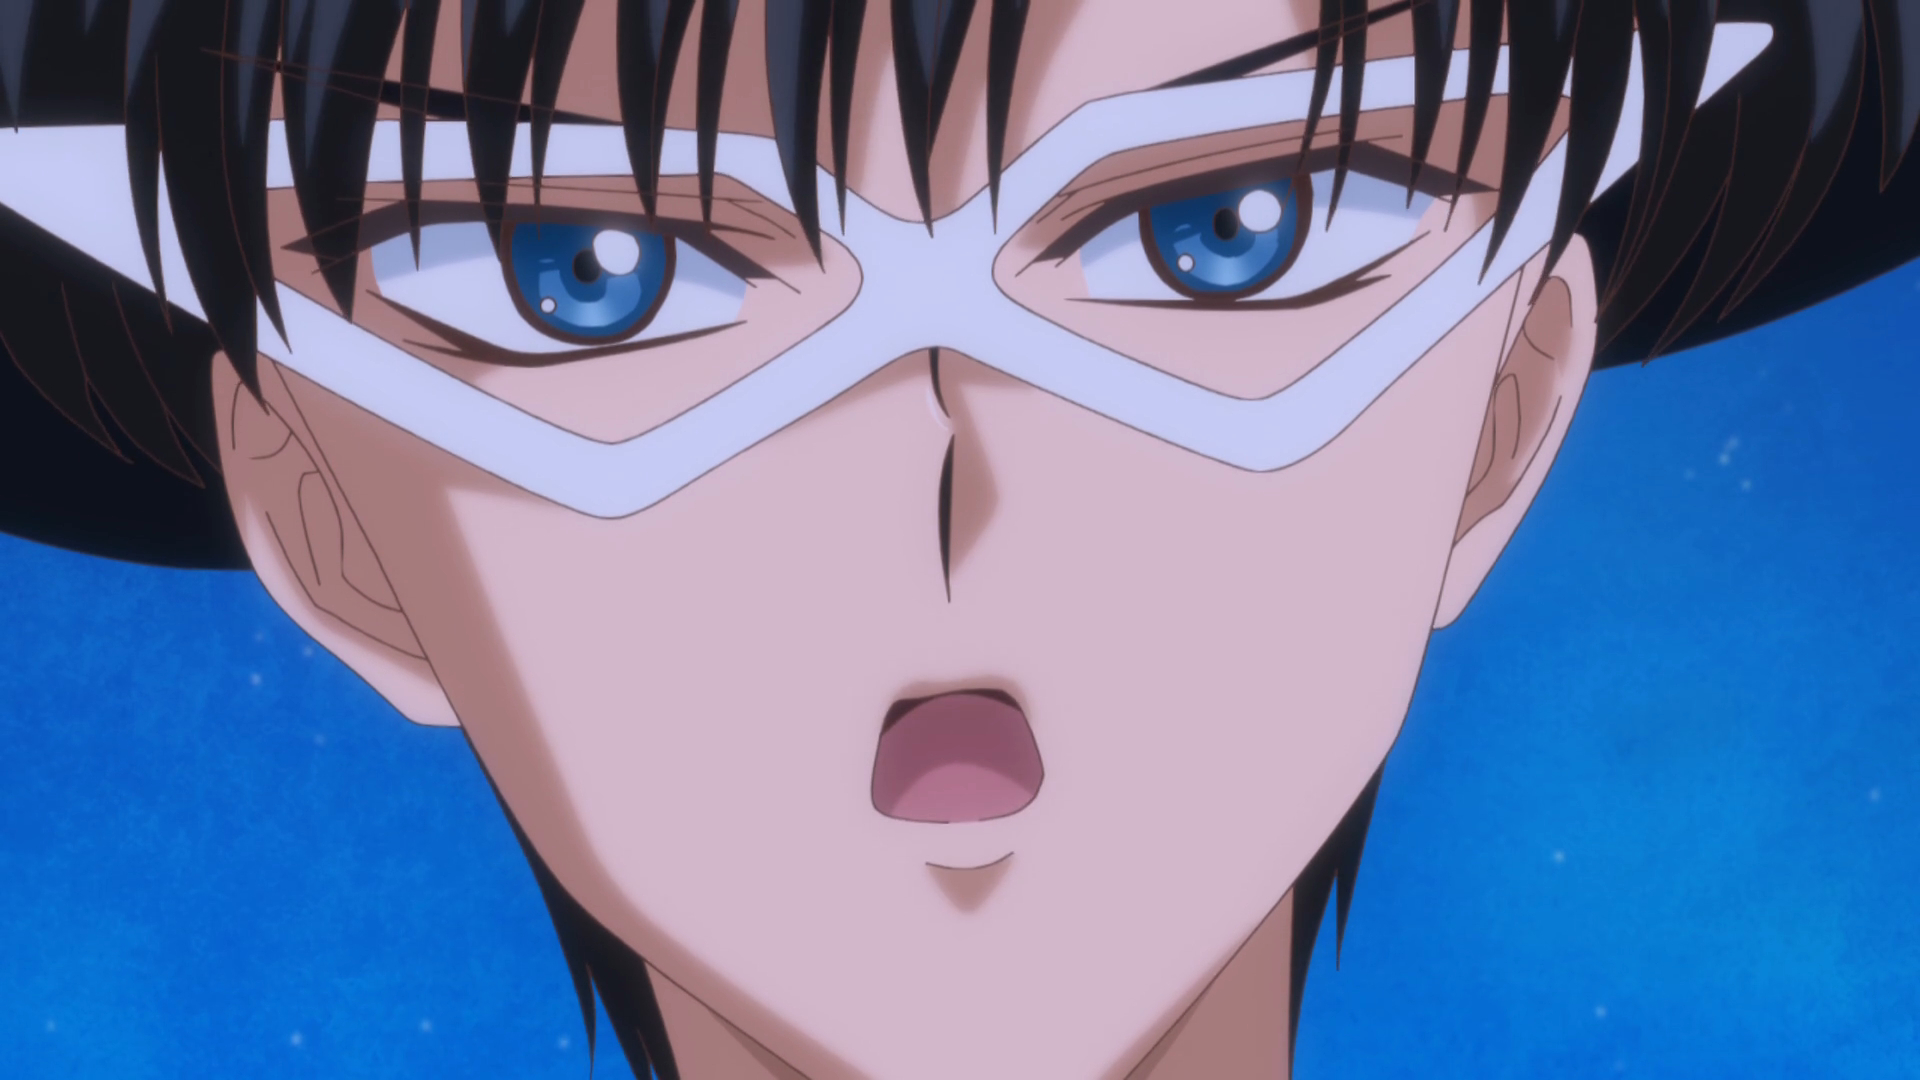 1920x1080 Review: Sailor Moon Crystal, Episode 6: Tuxedo Mask | Christian Anime Review